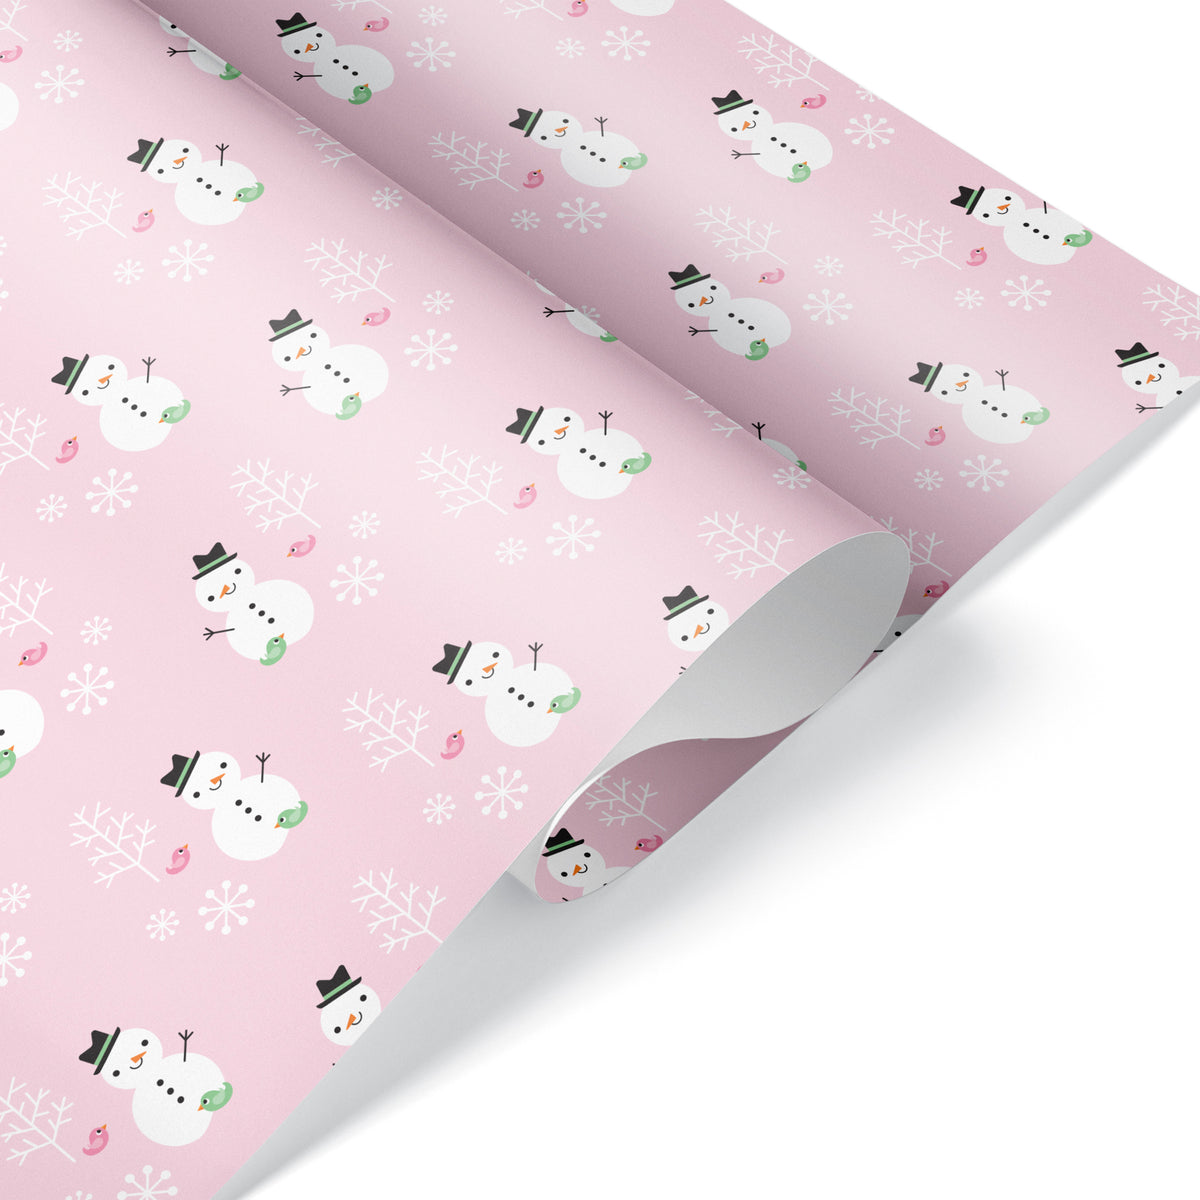 Set of 3 Assorted Christmas Wrapping Papers - PASTEL 2